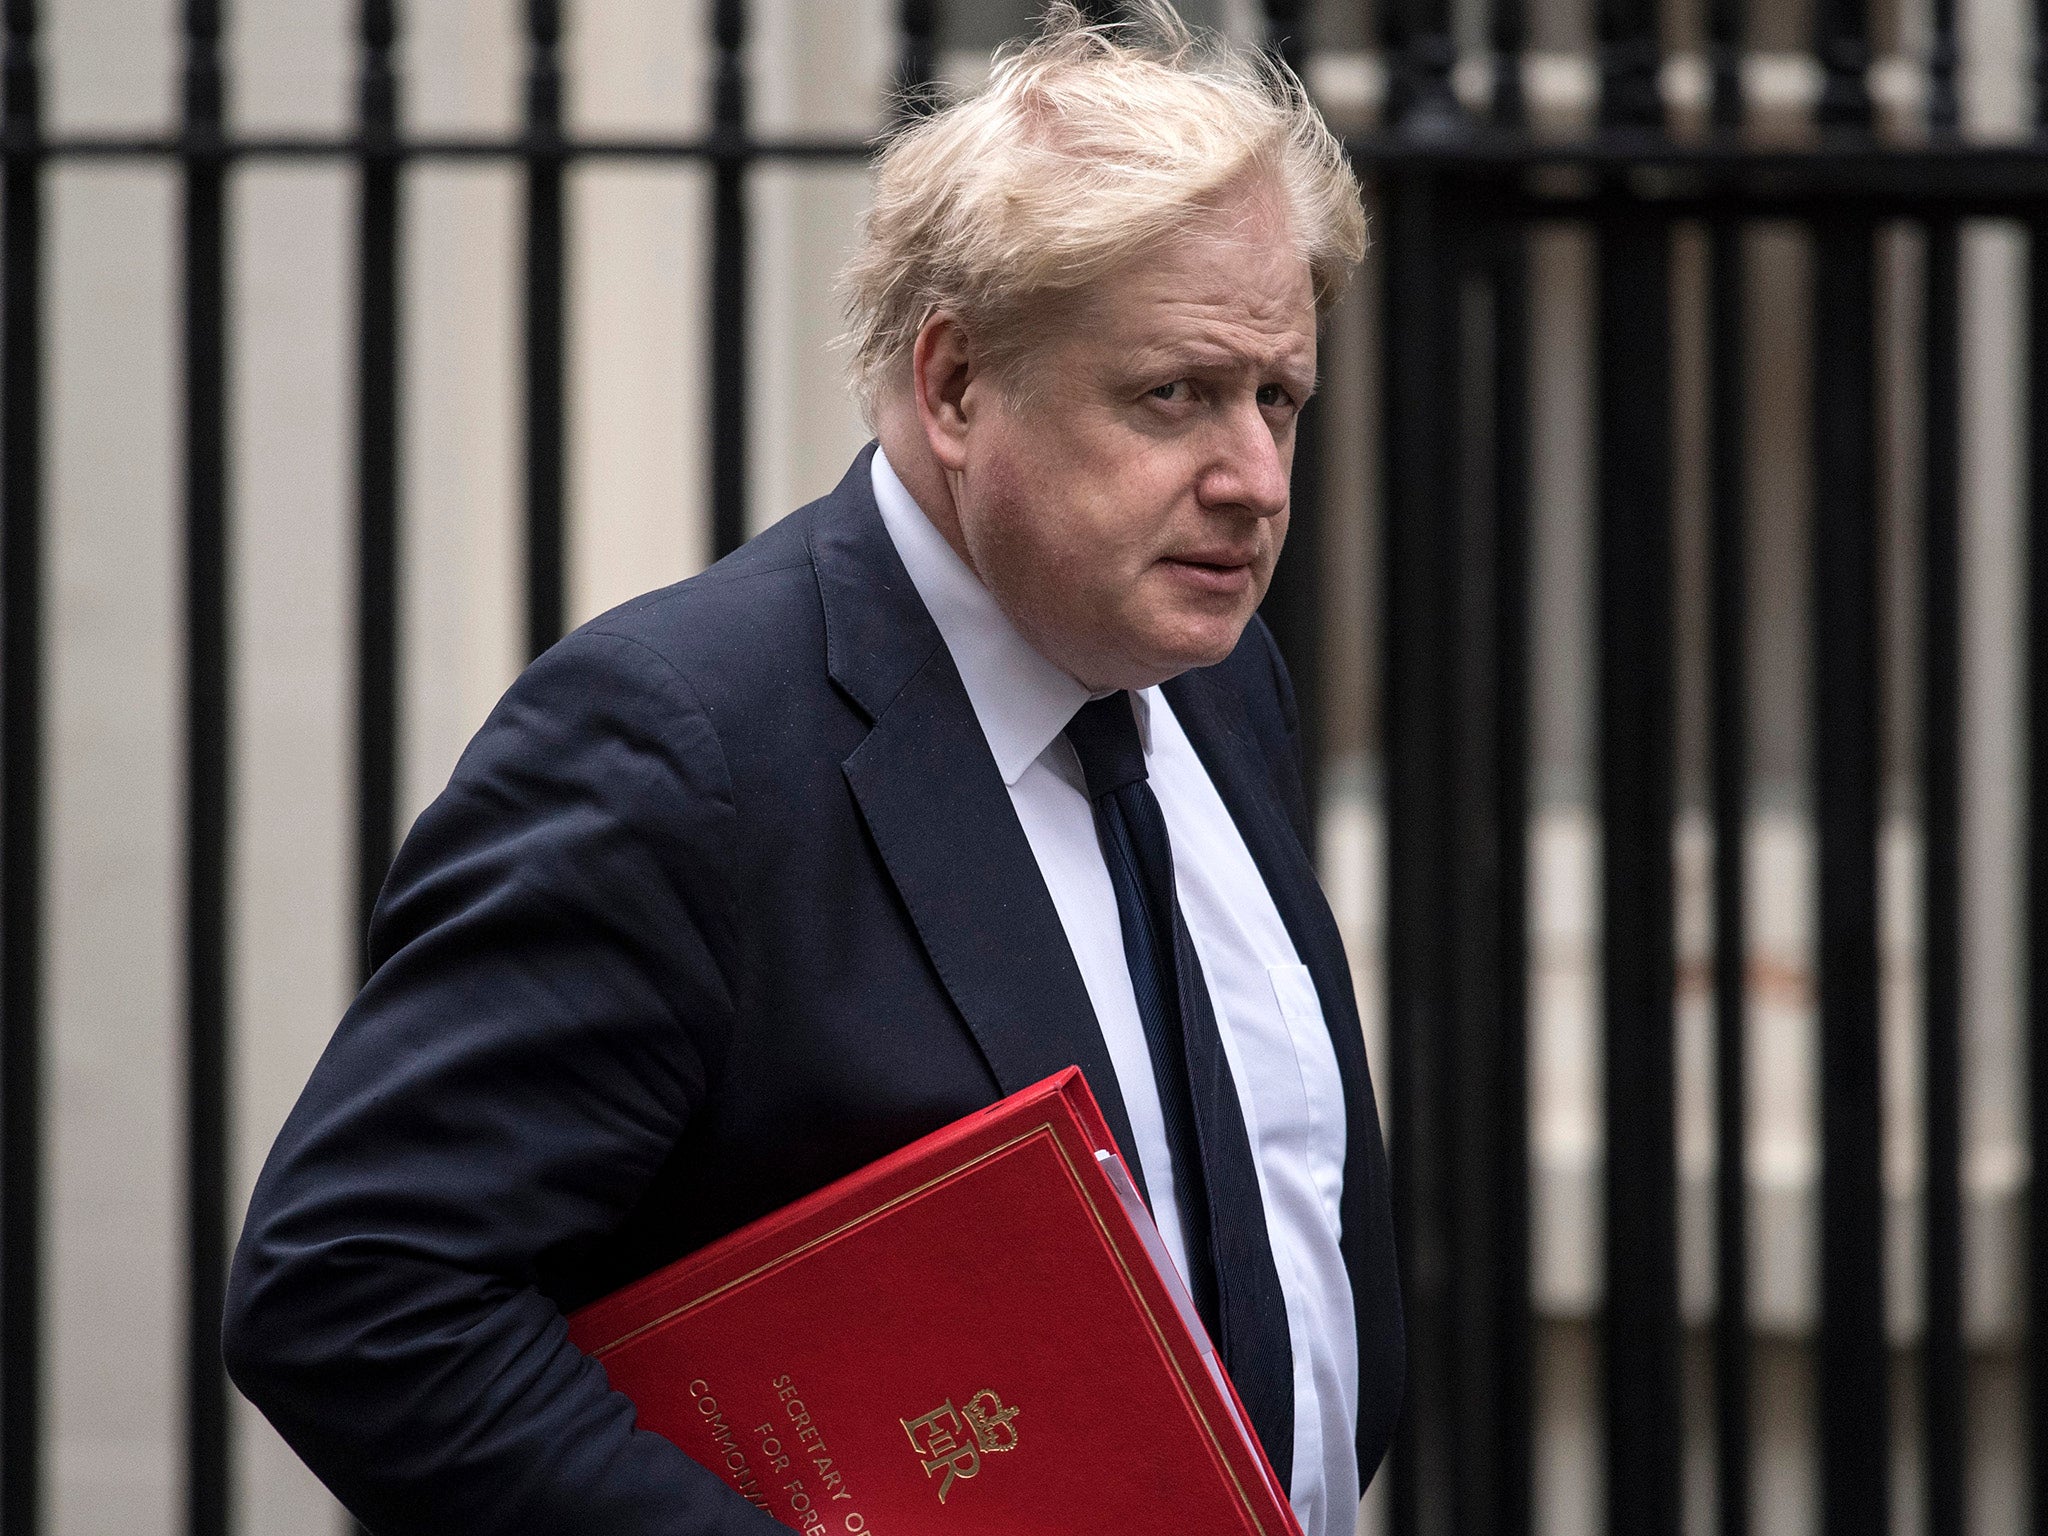 Boris Johnson was slapped down over his call for more NHS funding